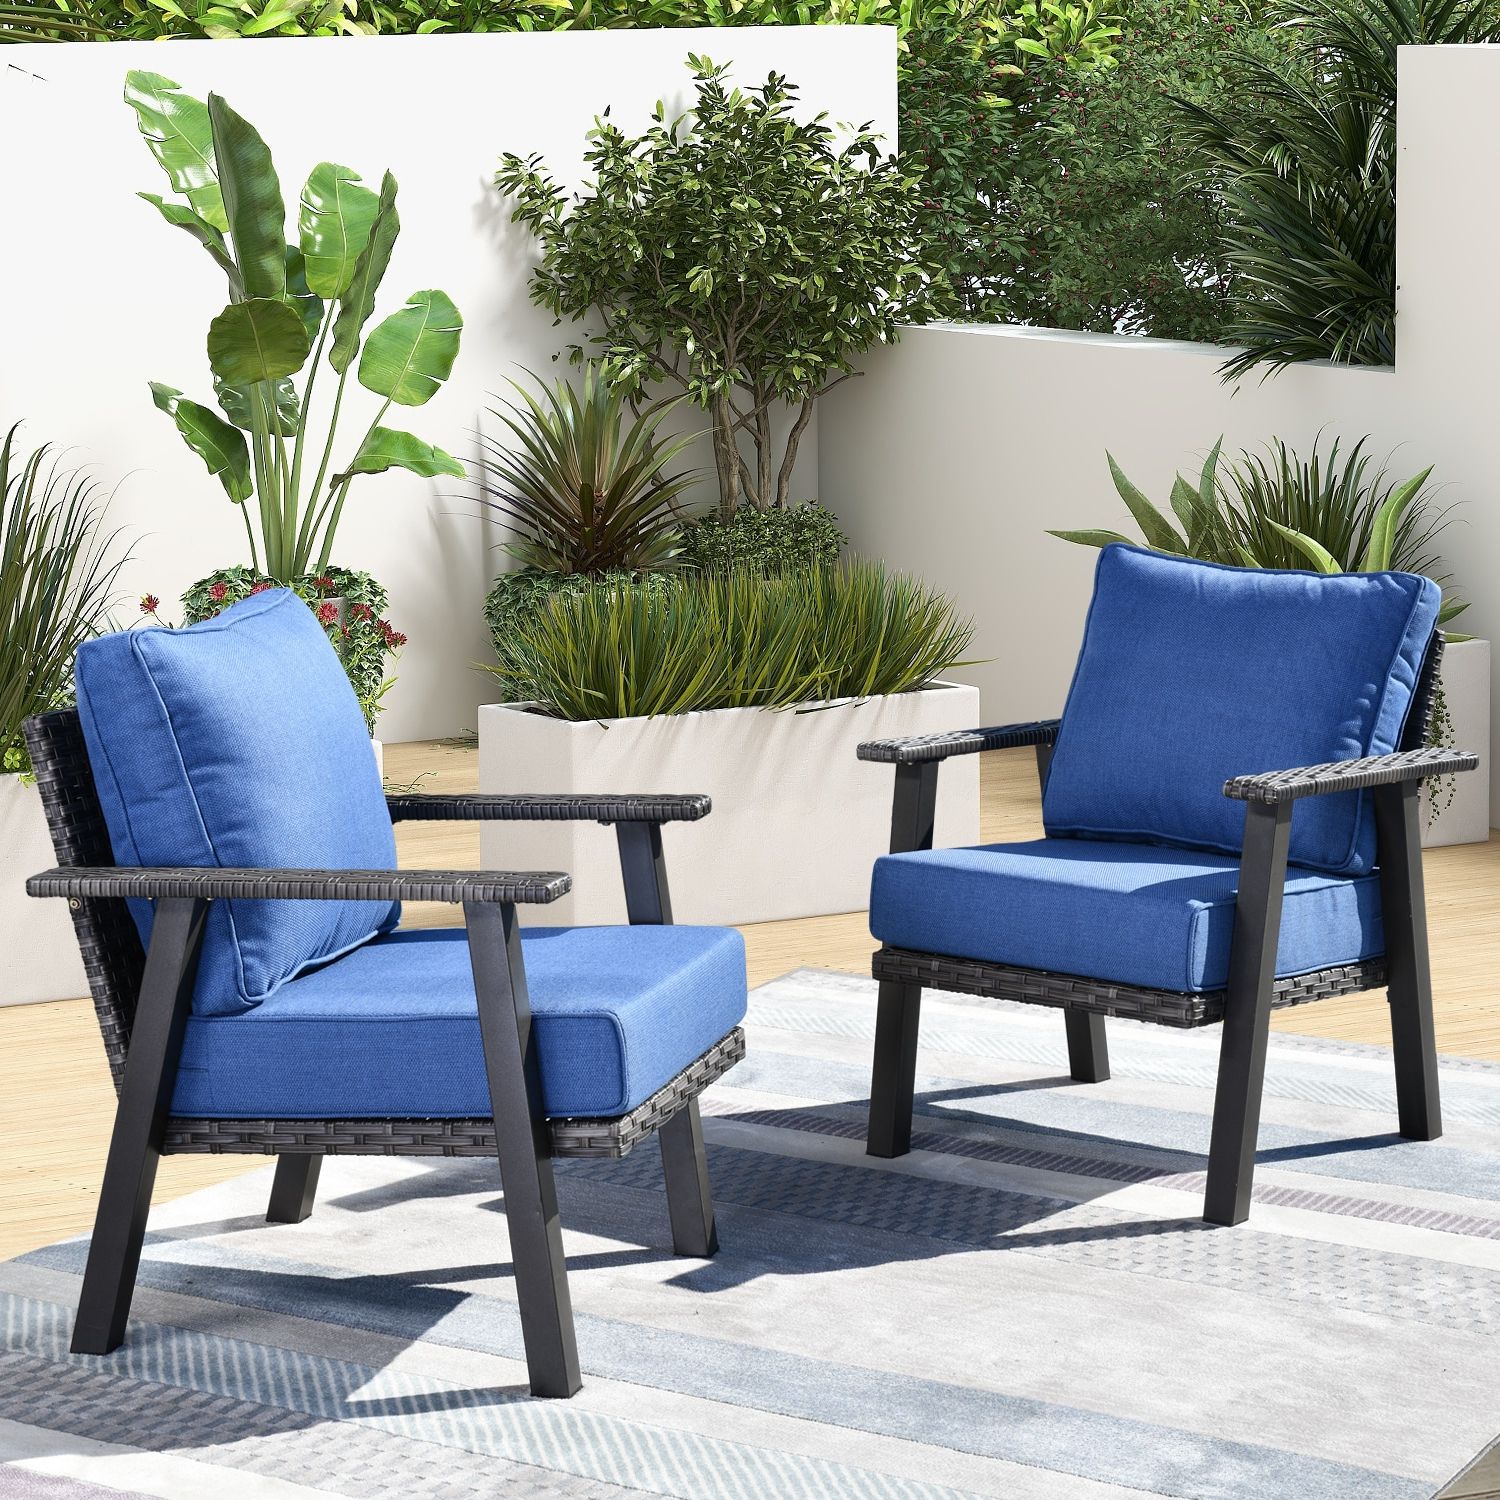 Xizzi Pisces Set Of 2 Wicker Blue Cushion Iron Frame Stationary Conversation  Chair(s) With Blue Cushioned Seat In The Patio Chairs Department At  Lowes With Regard To Popular Outdoor Stationary Chat Set (Photo 5 of 15)